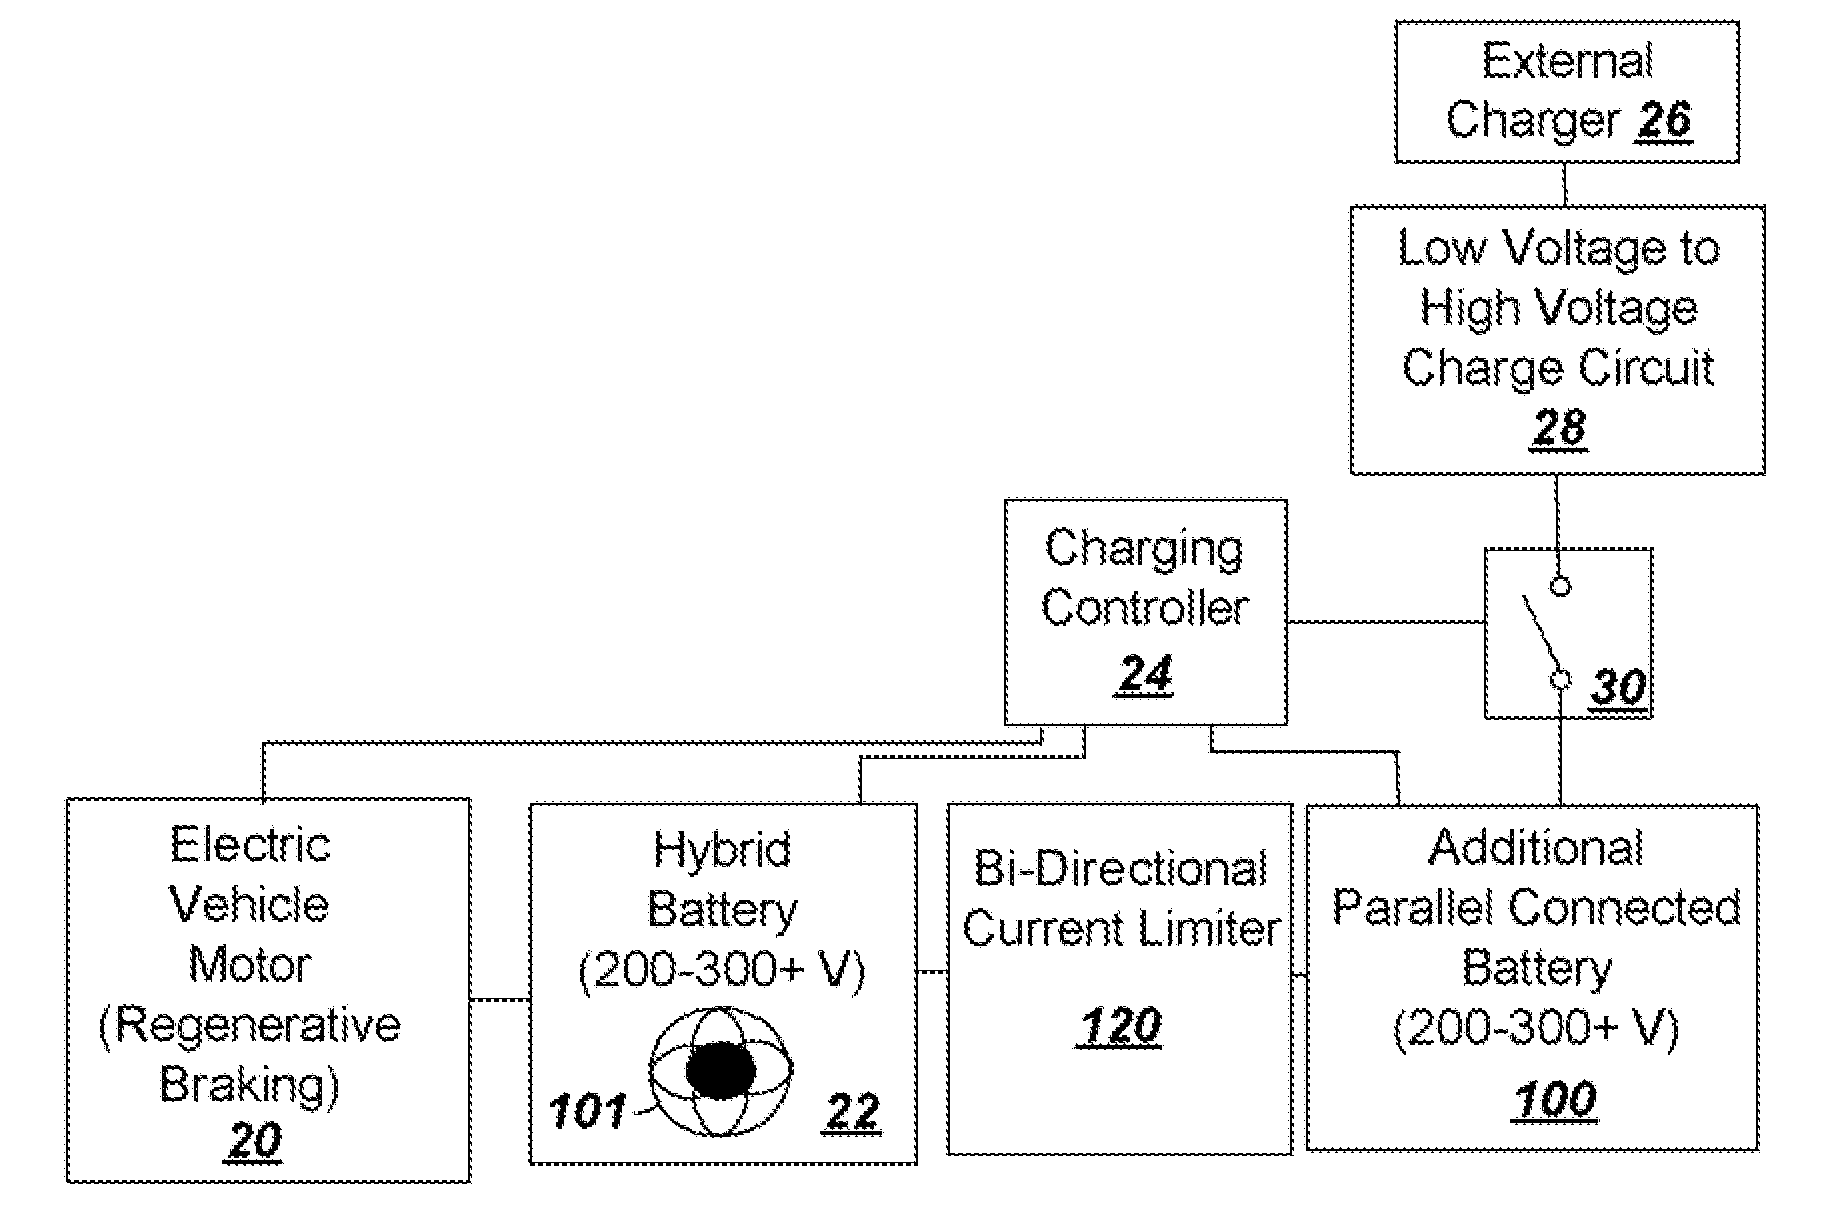 Current clamping parallel battery charging system to supplement regenerative braking in electric vehicle